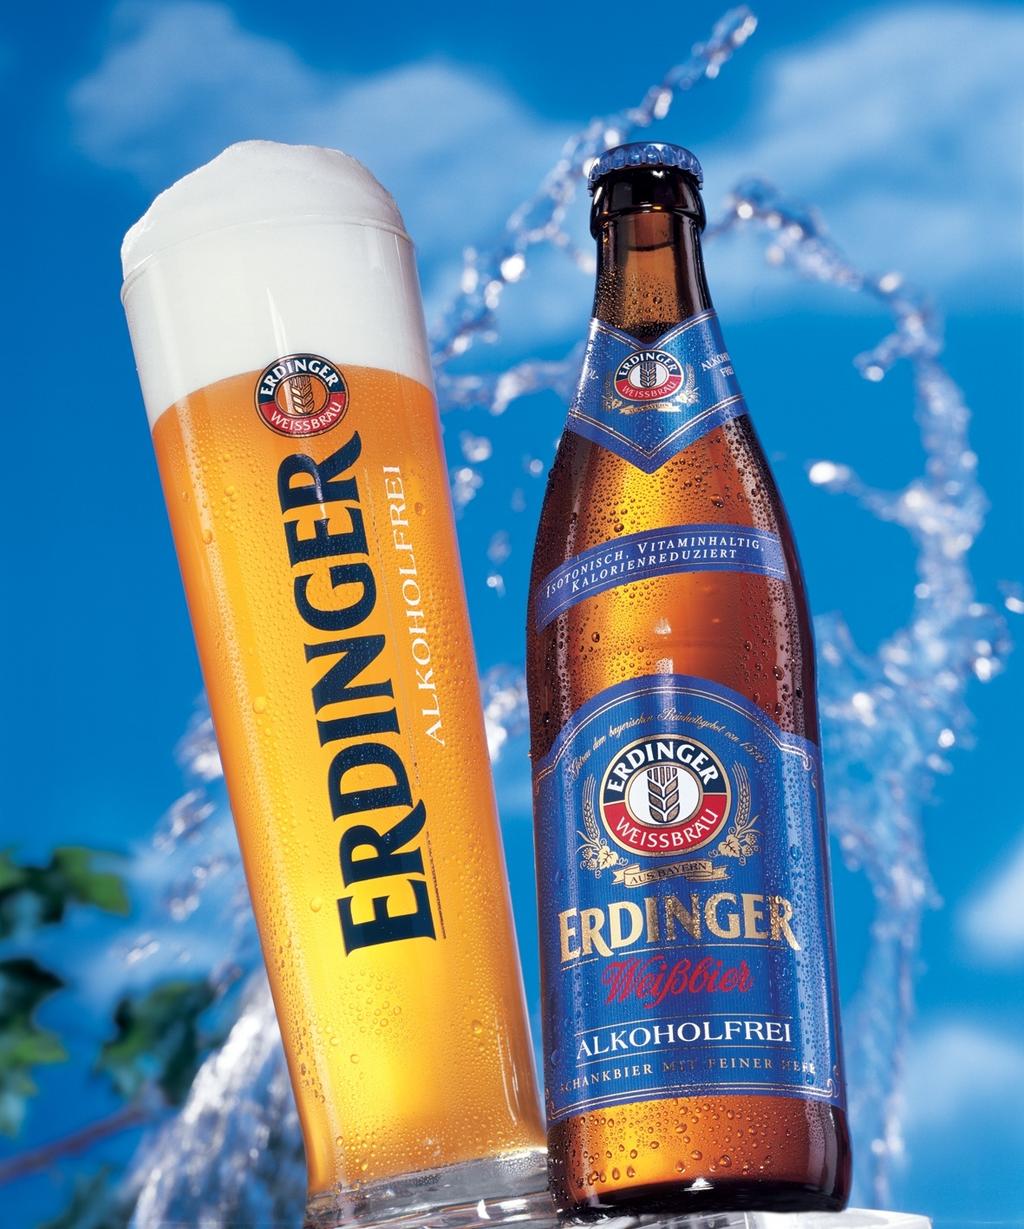 Known as the sports and fitness drink! Erdinger Weissbier Non- Alcoholic!